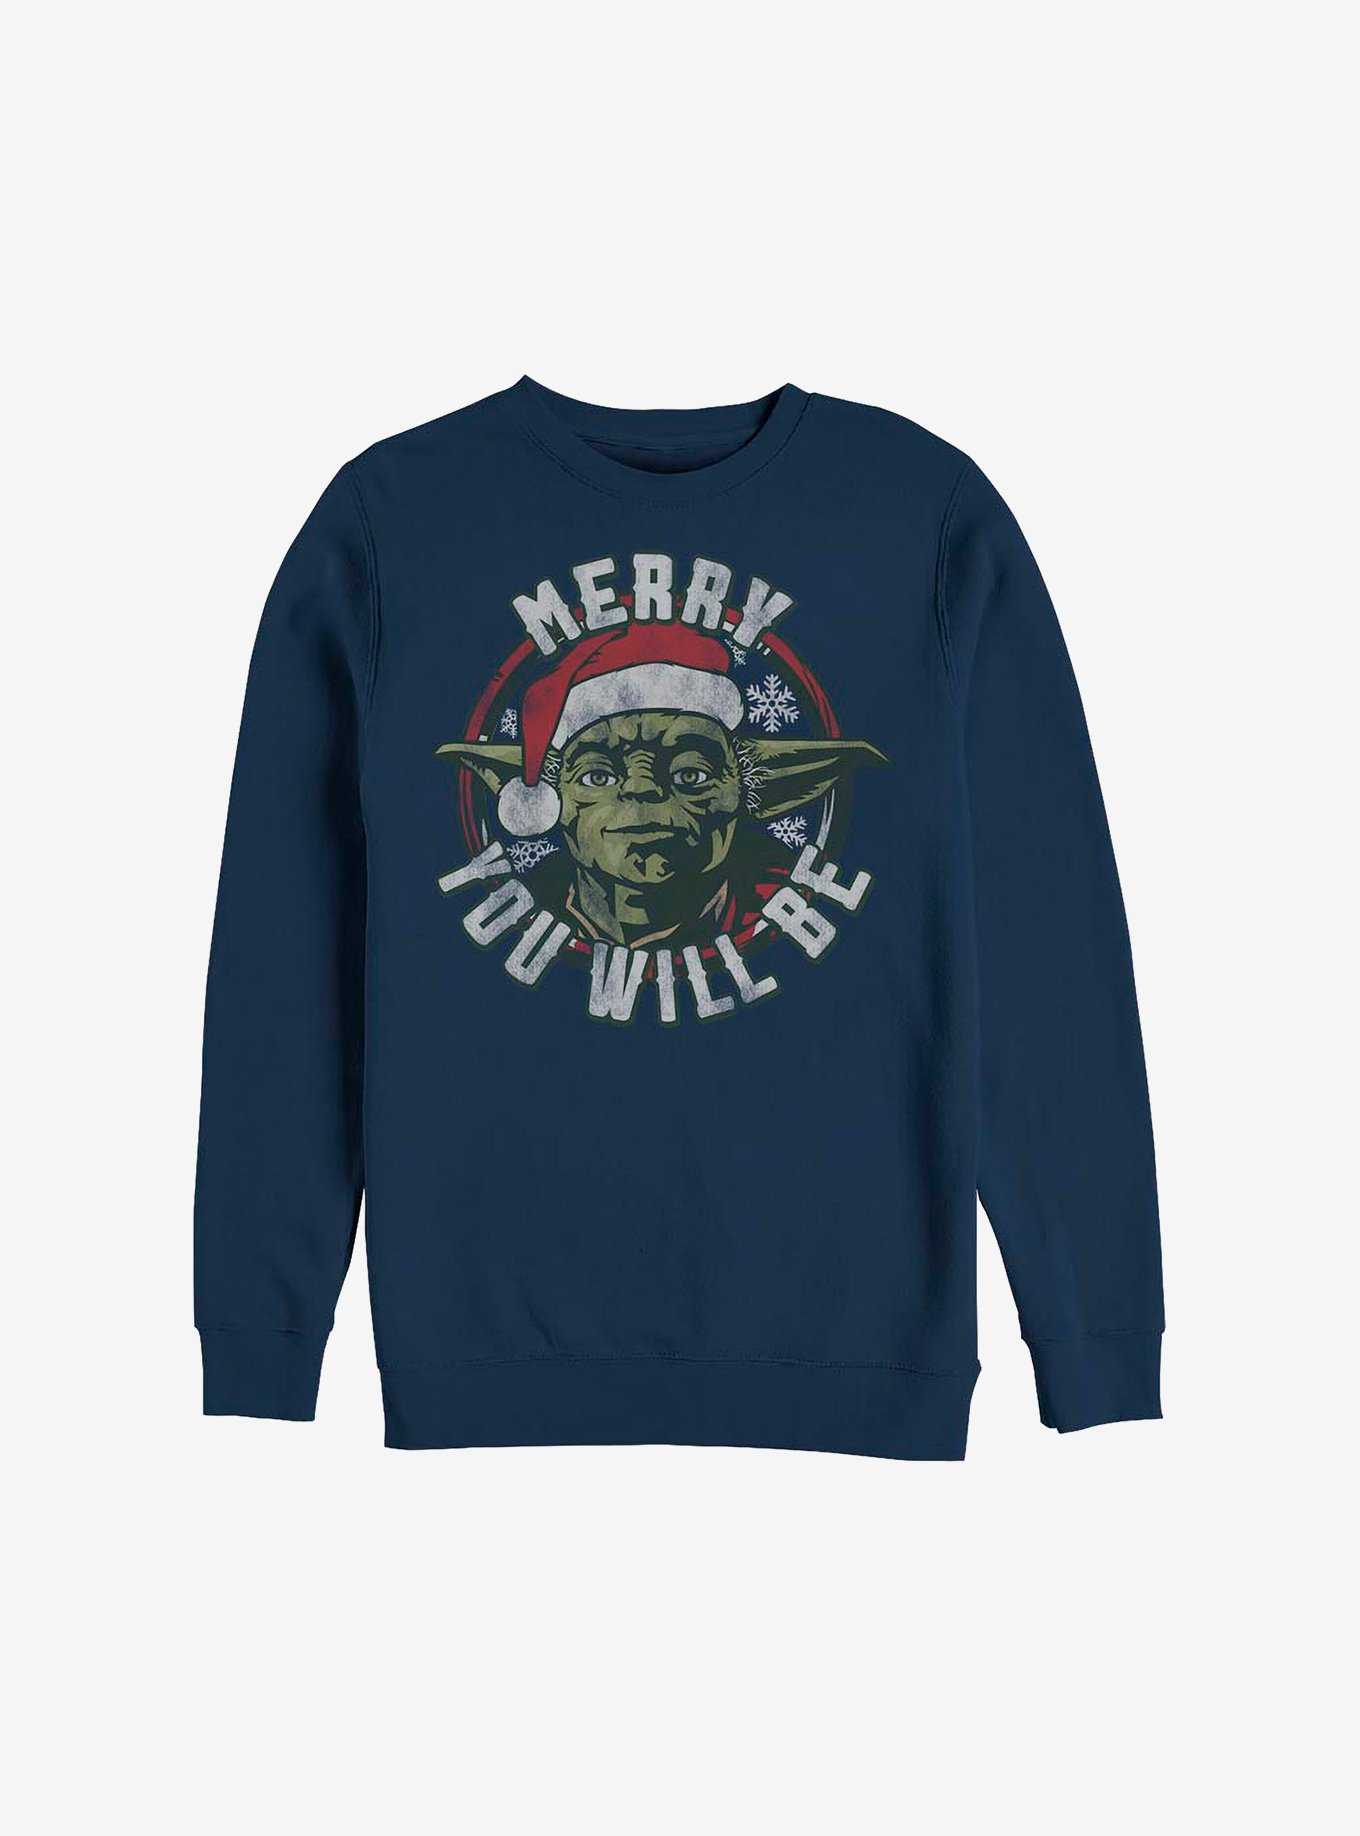 Star Wars Merry You Will Be Holiday Sweatshirt, , hi-res